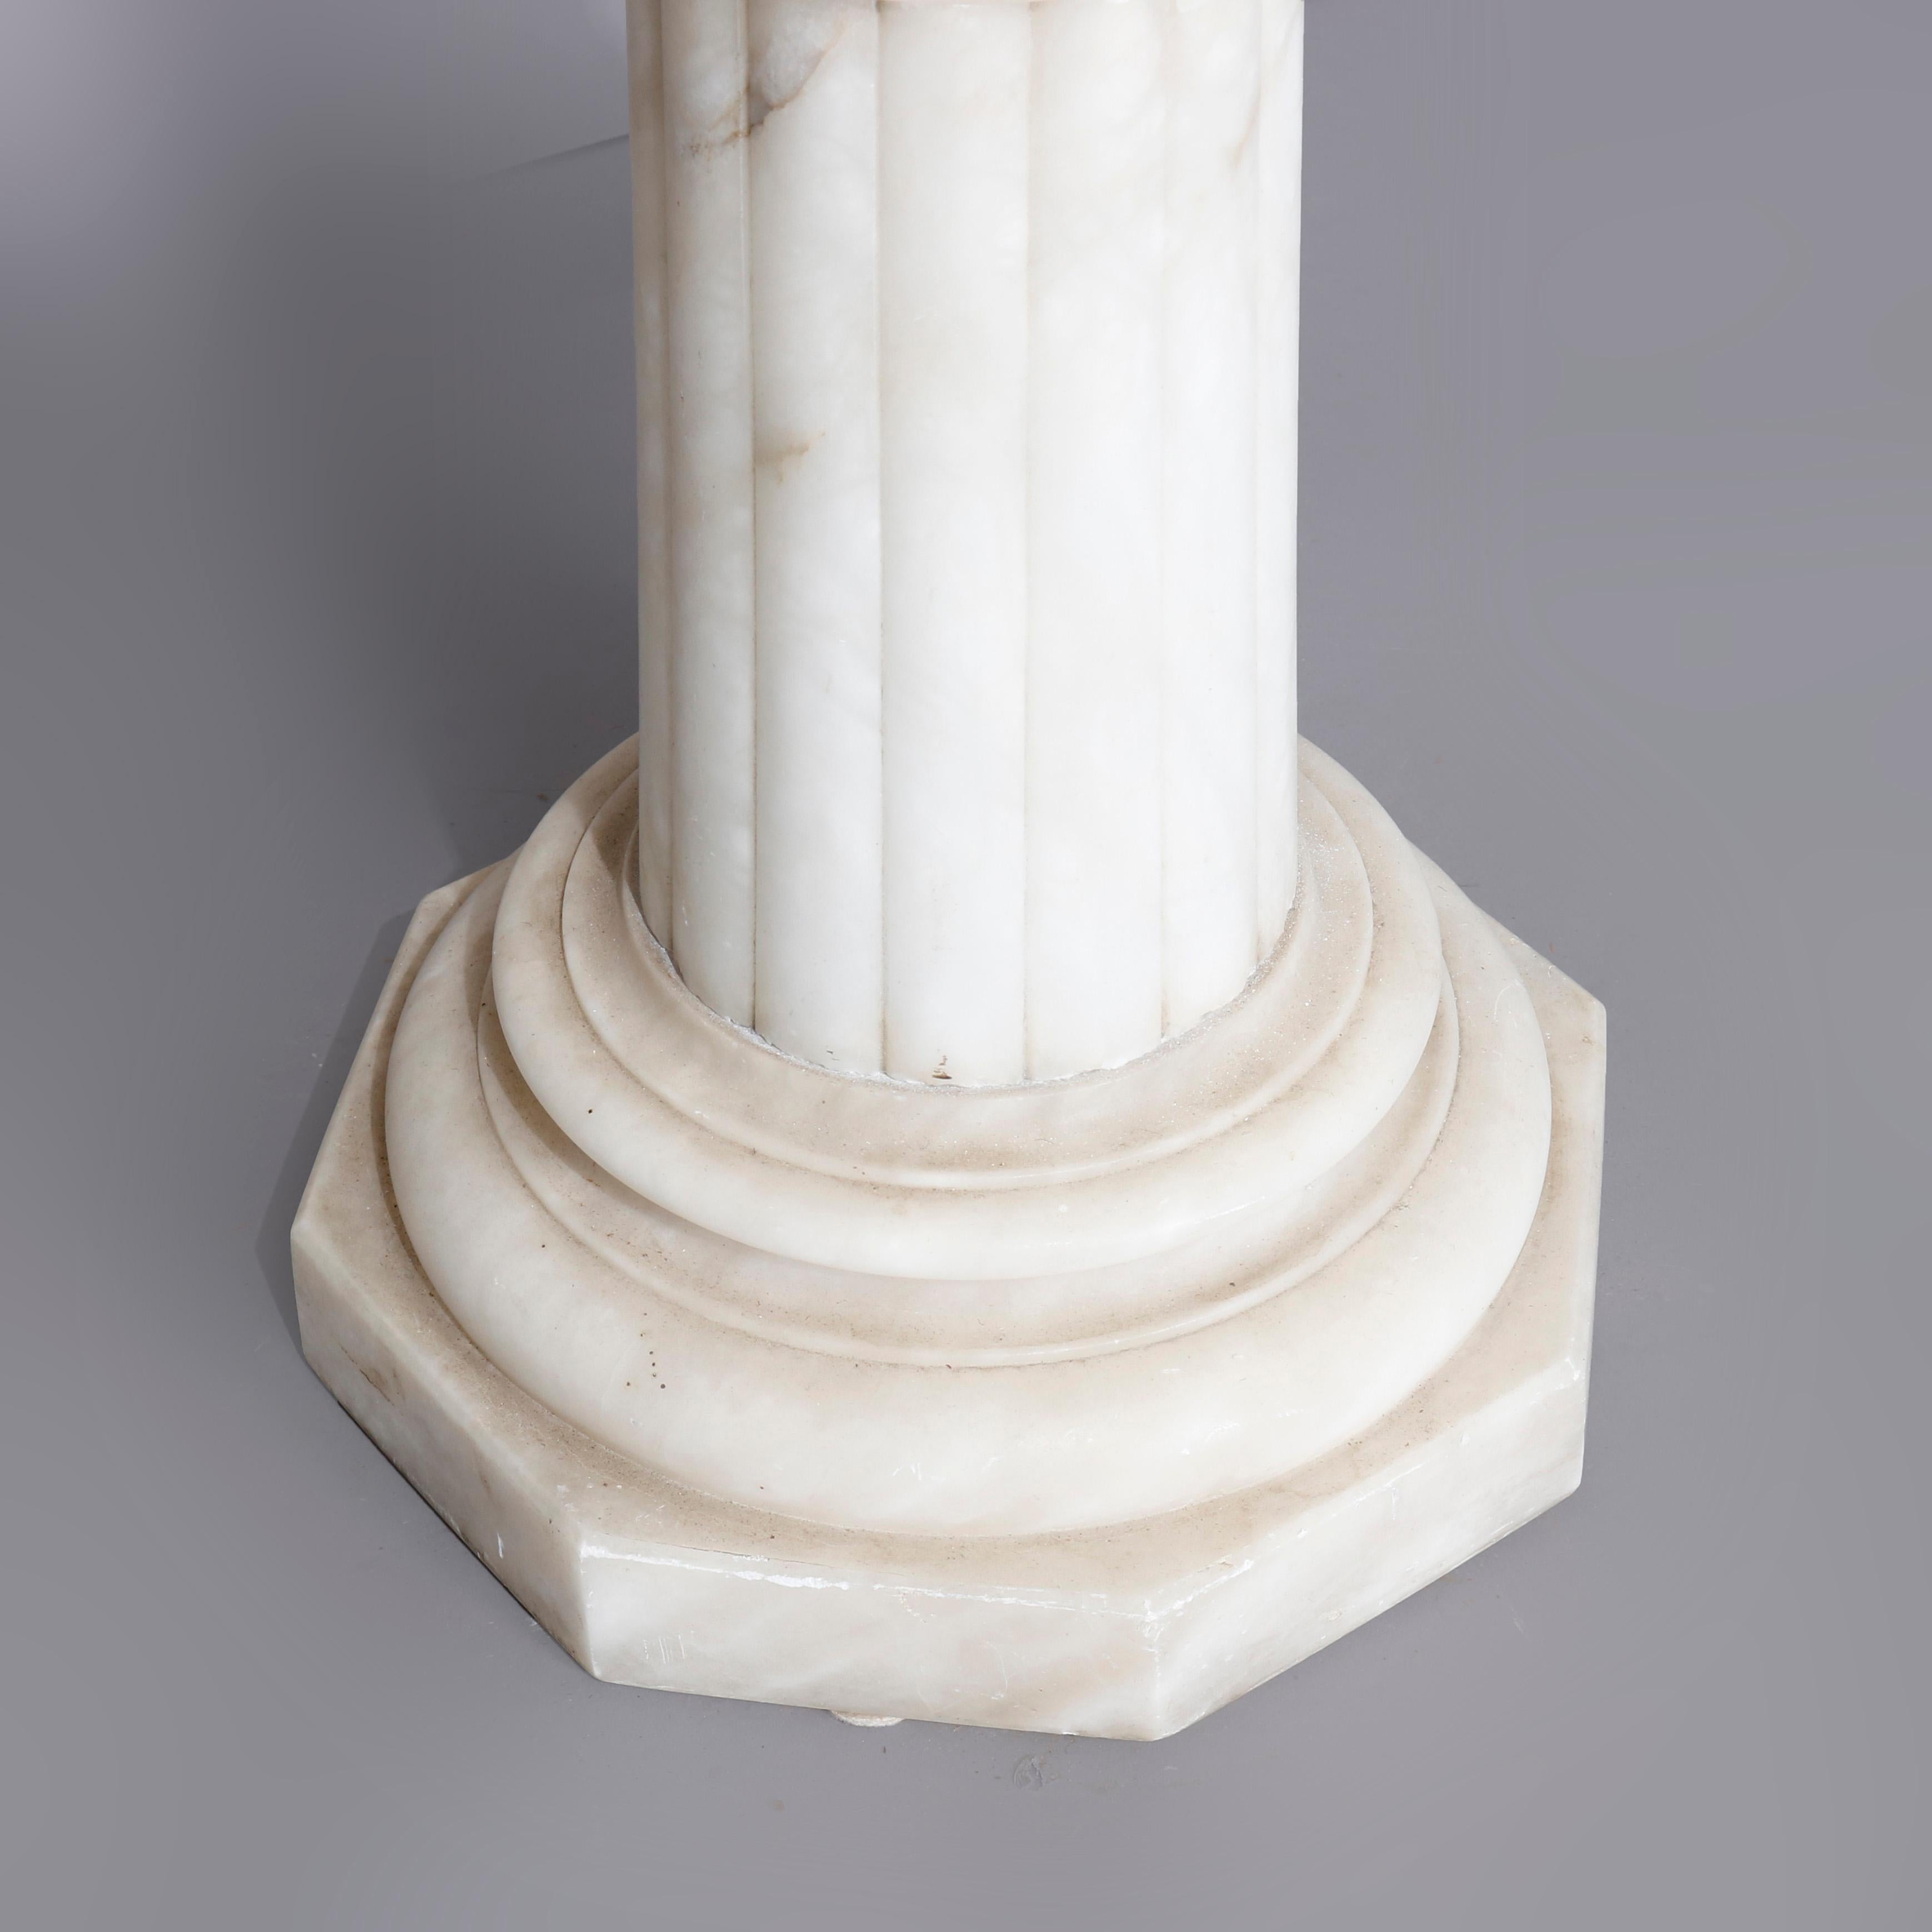 20th Century Antique Carved Italian Marble Neo Classical Sculpture Display Stand, circa 1900